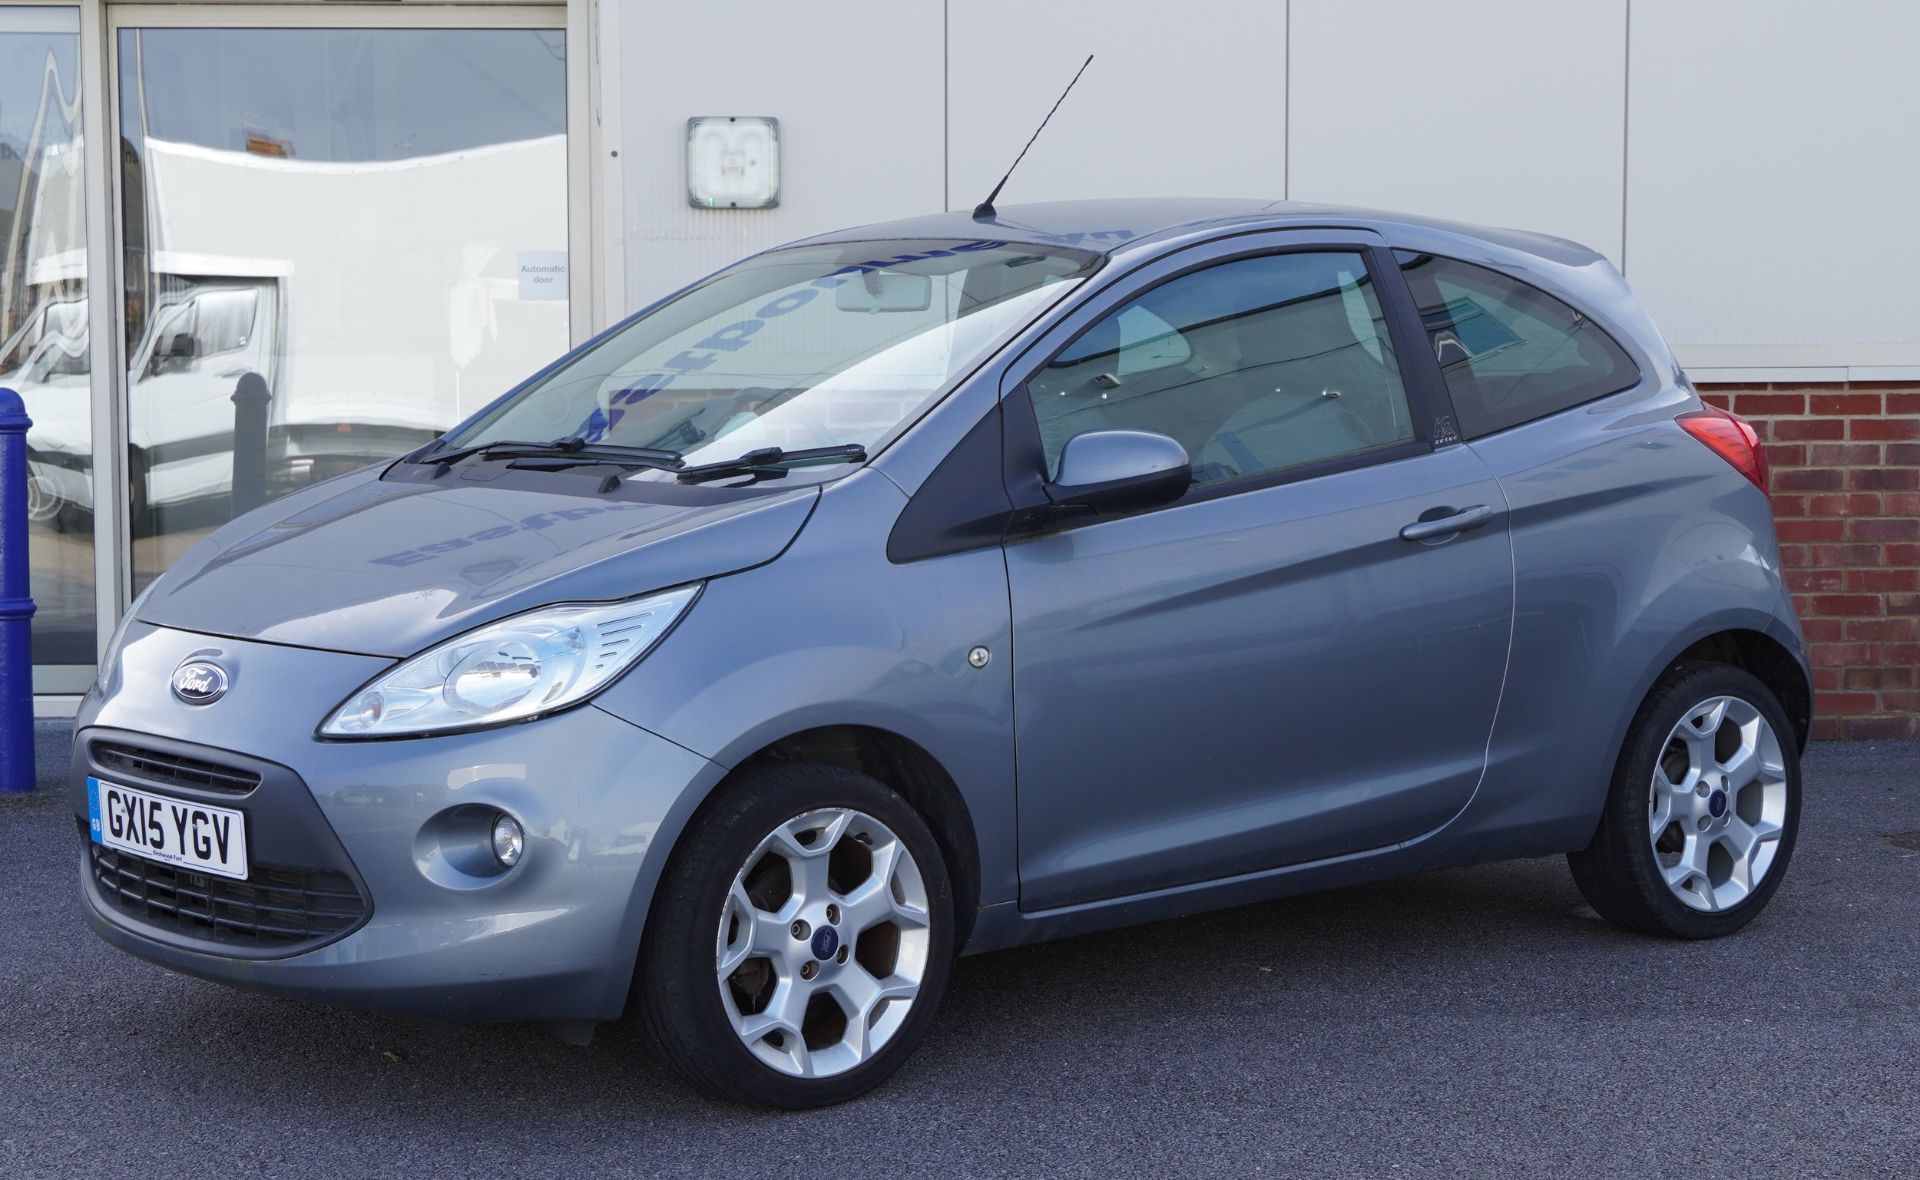 2015 manual Ford KA Zetec. 1.2 petrol three door hatchback, Reg GX15 YGV, One owner from new, 7434 - Image 2 of 15